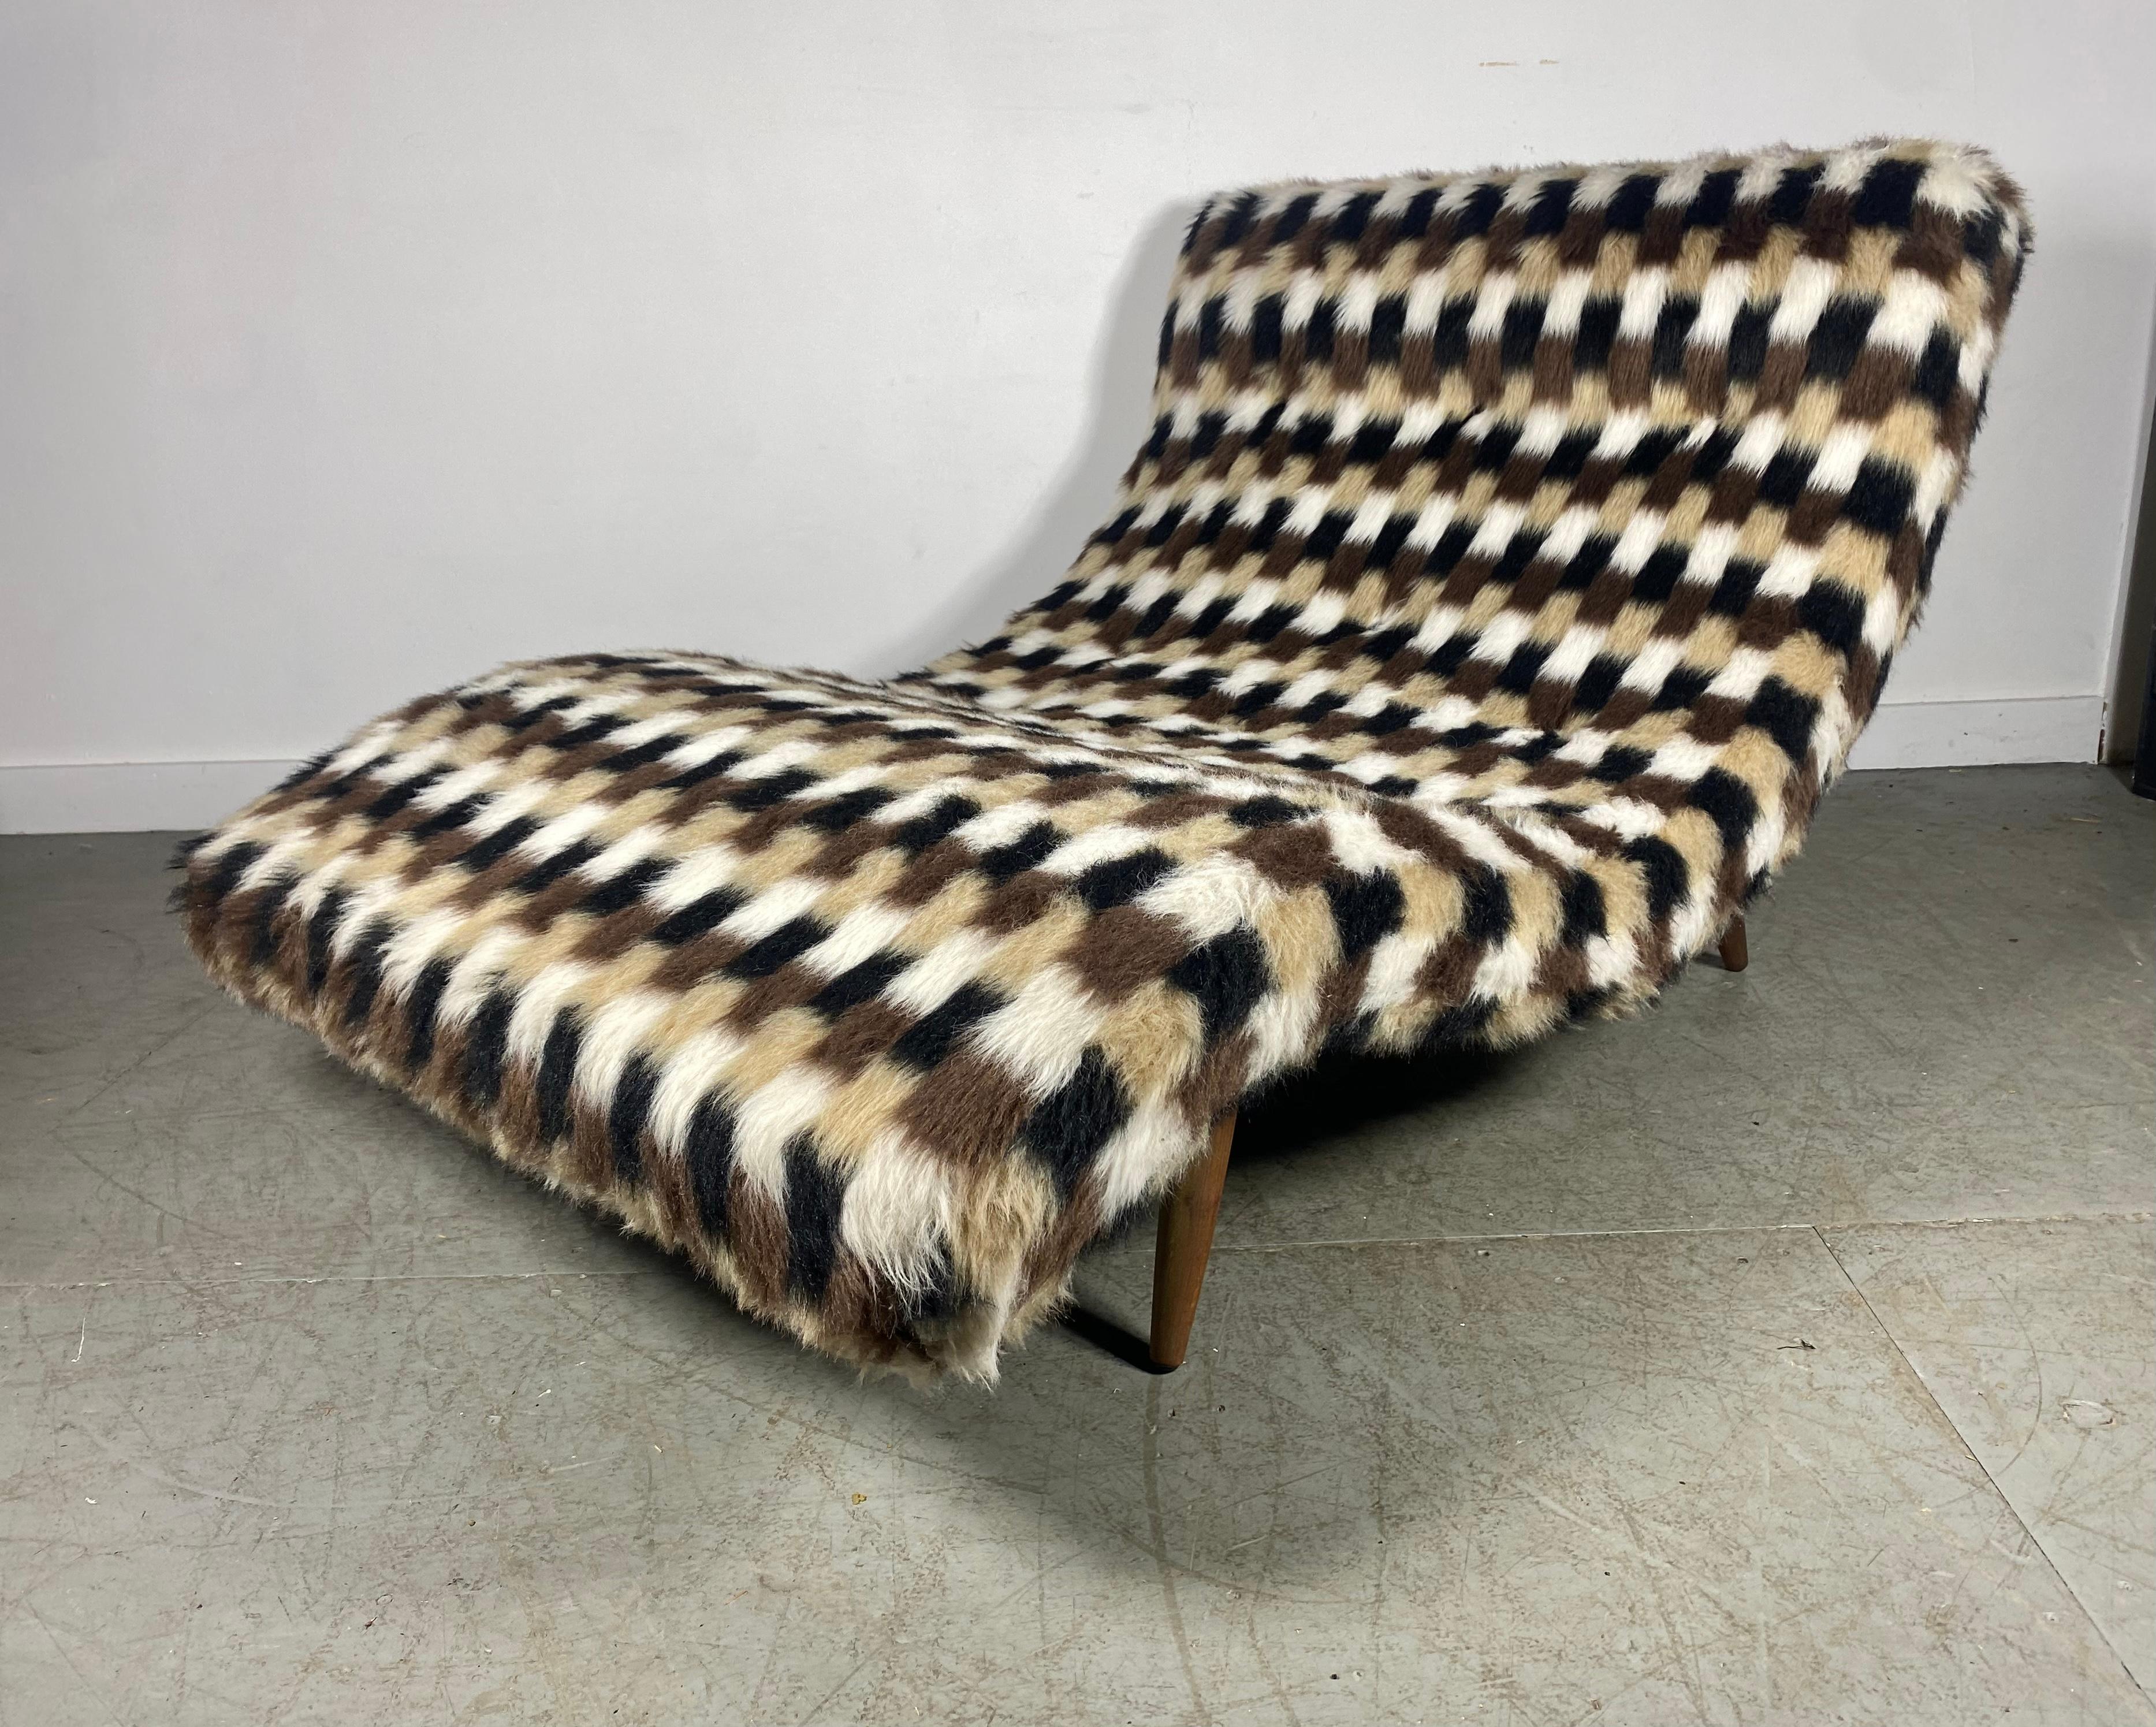 Modernist Adrian Pearsall Wave Chaise Lounge in original geometric fabric For Sale 4